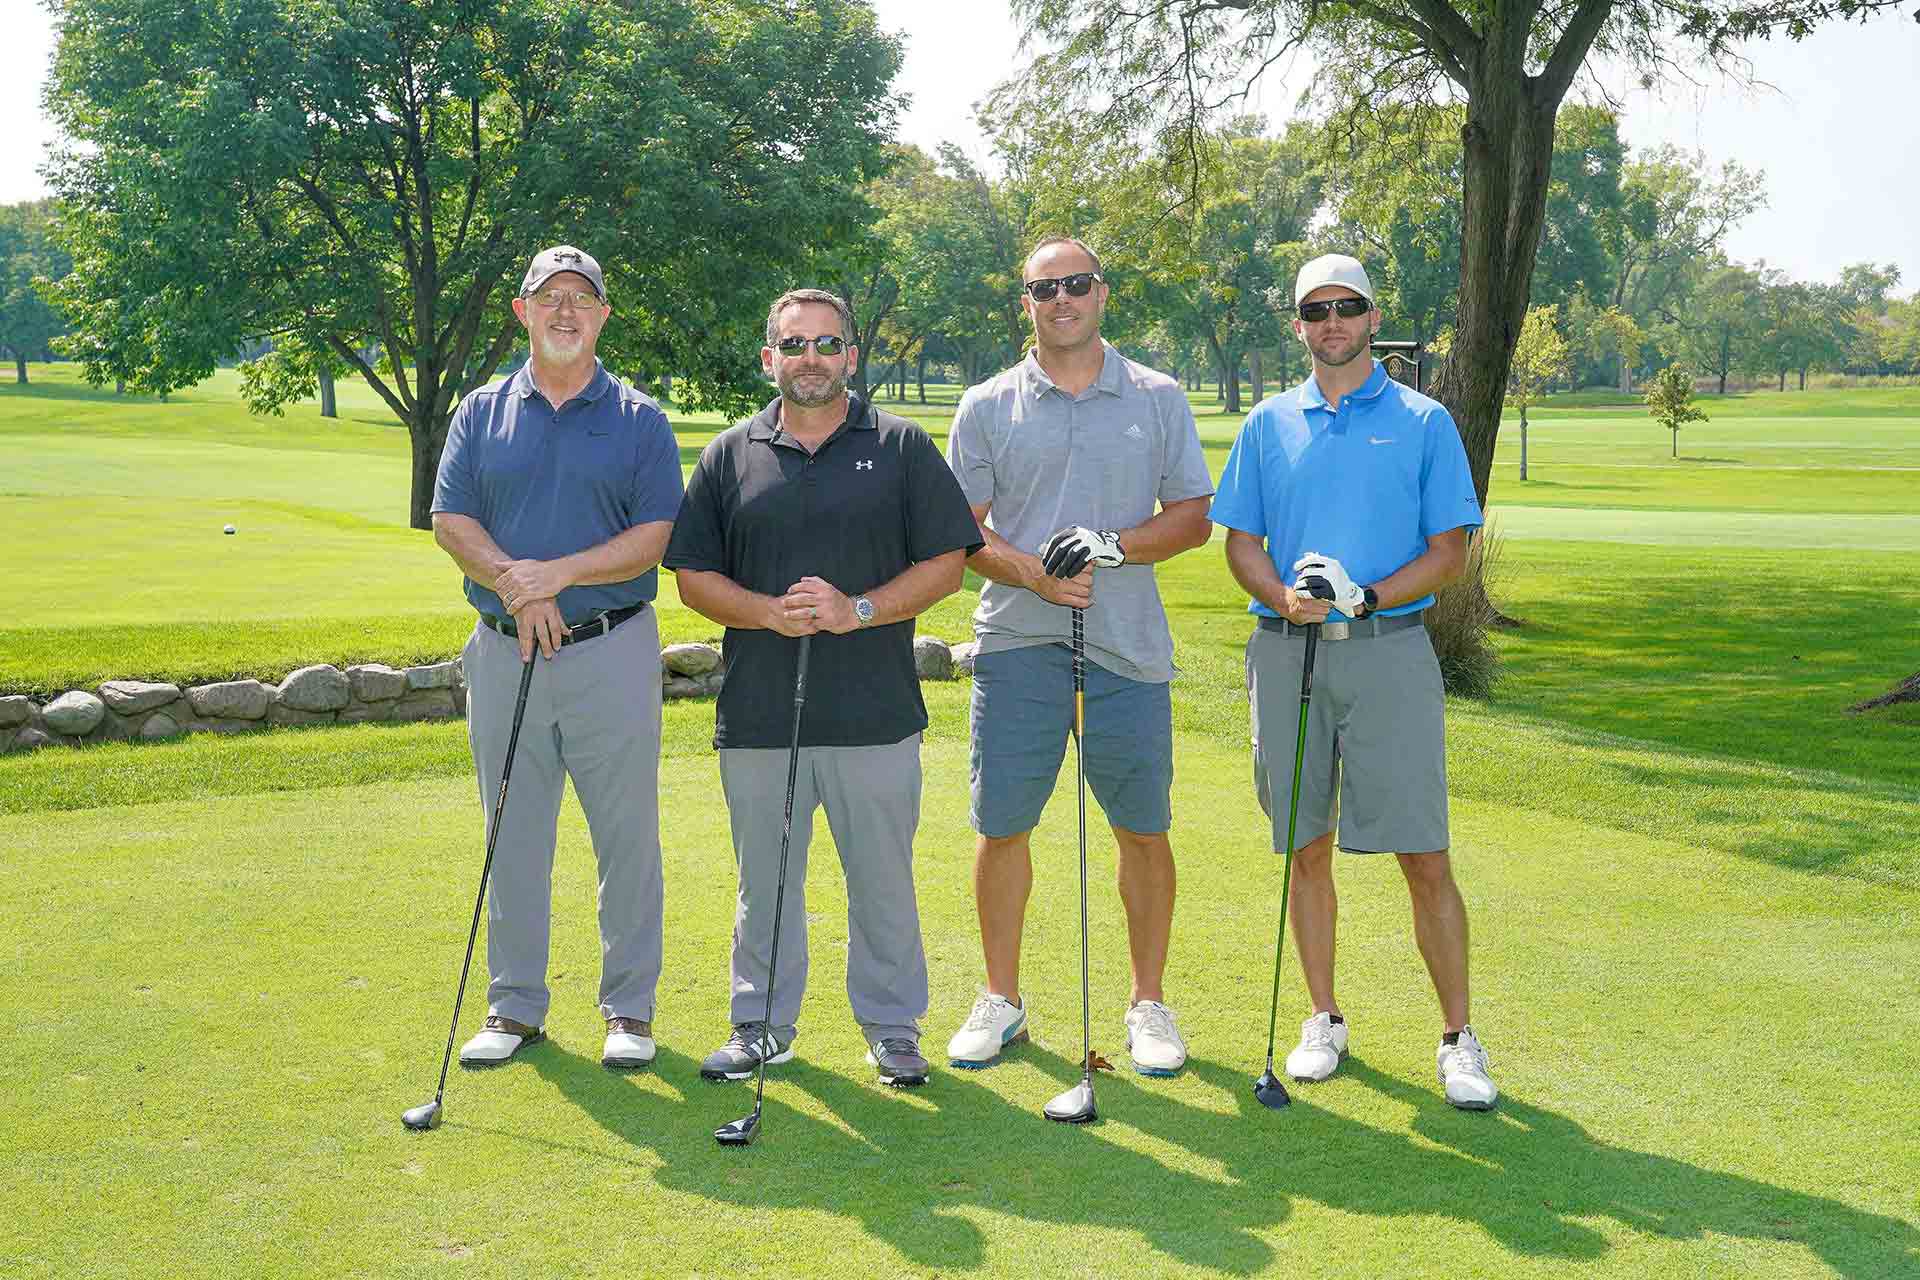 2019-endowment-classic-foru-men-with-golf-clubs